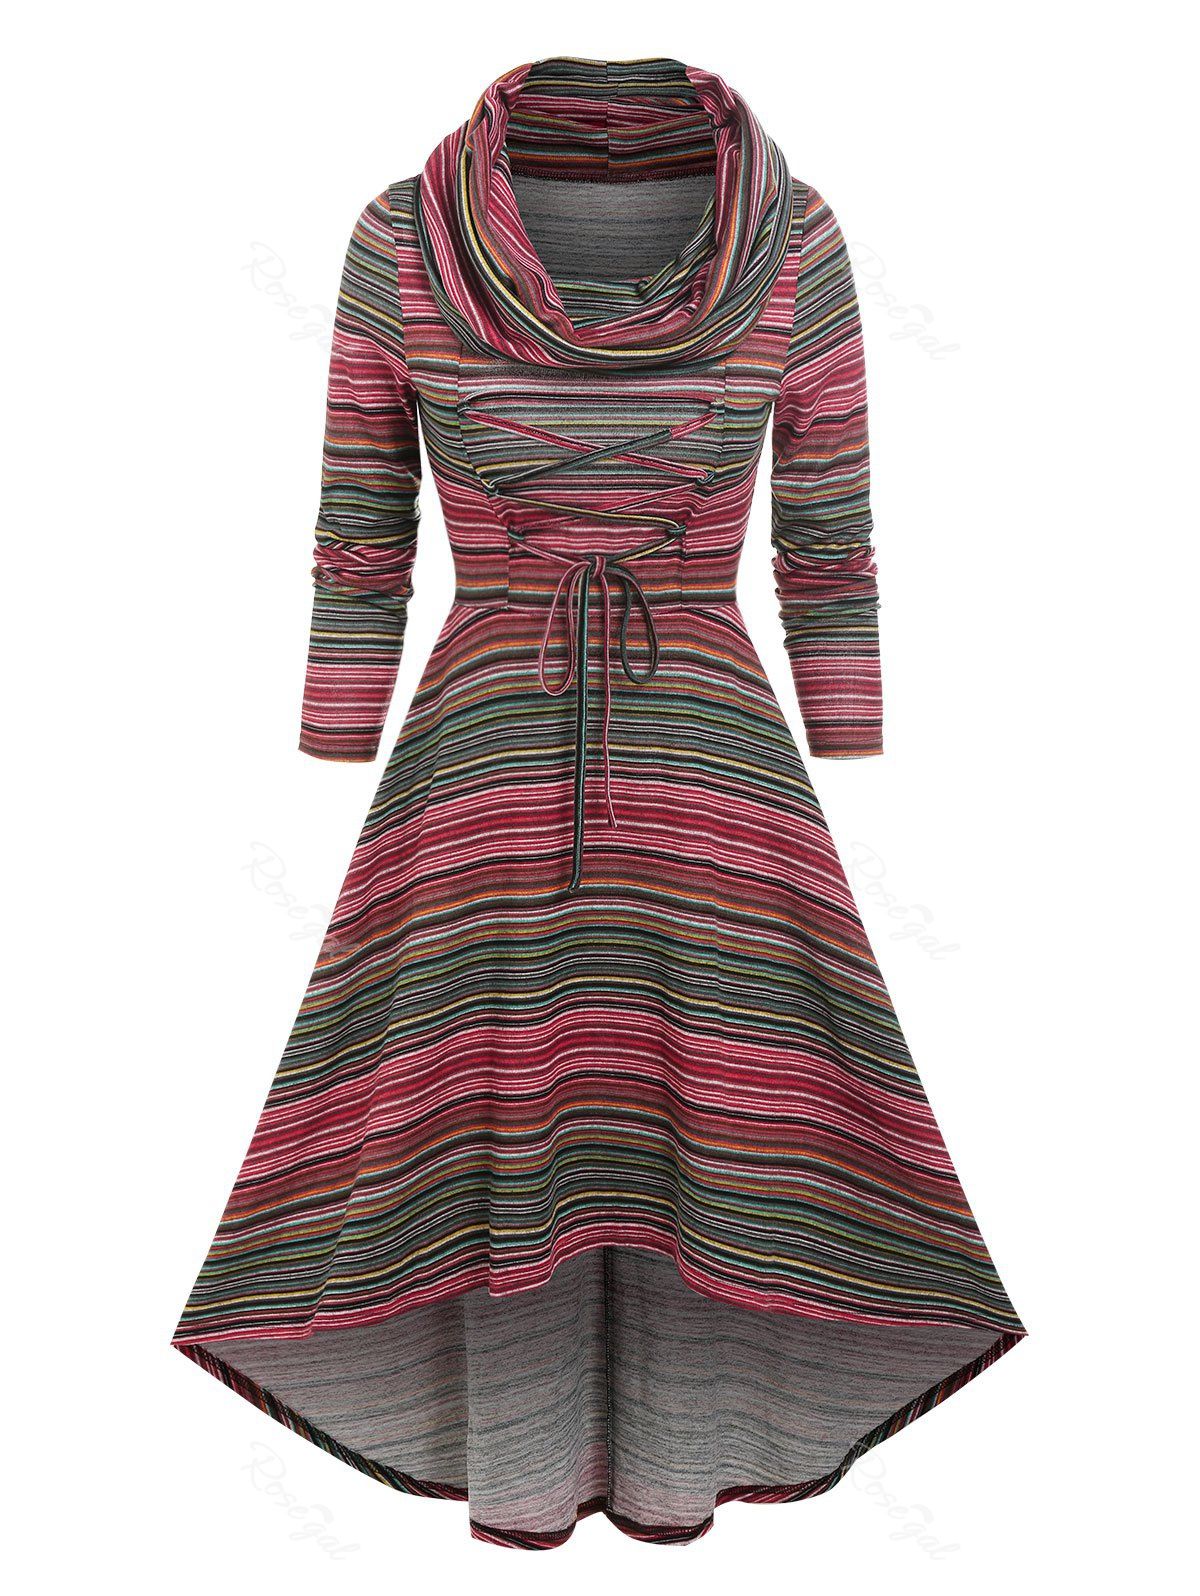 Trendy Cowl Neck Lace Up Colorful Stripe High Low Dress  